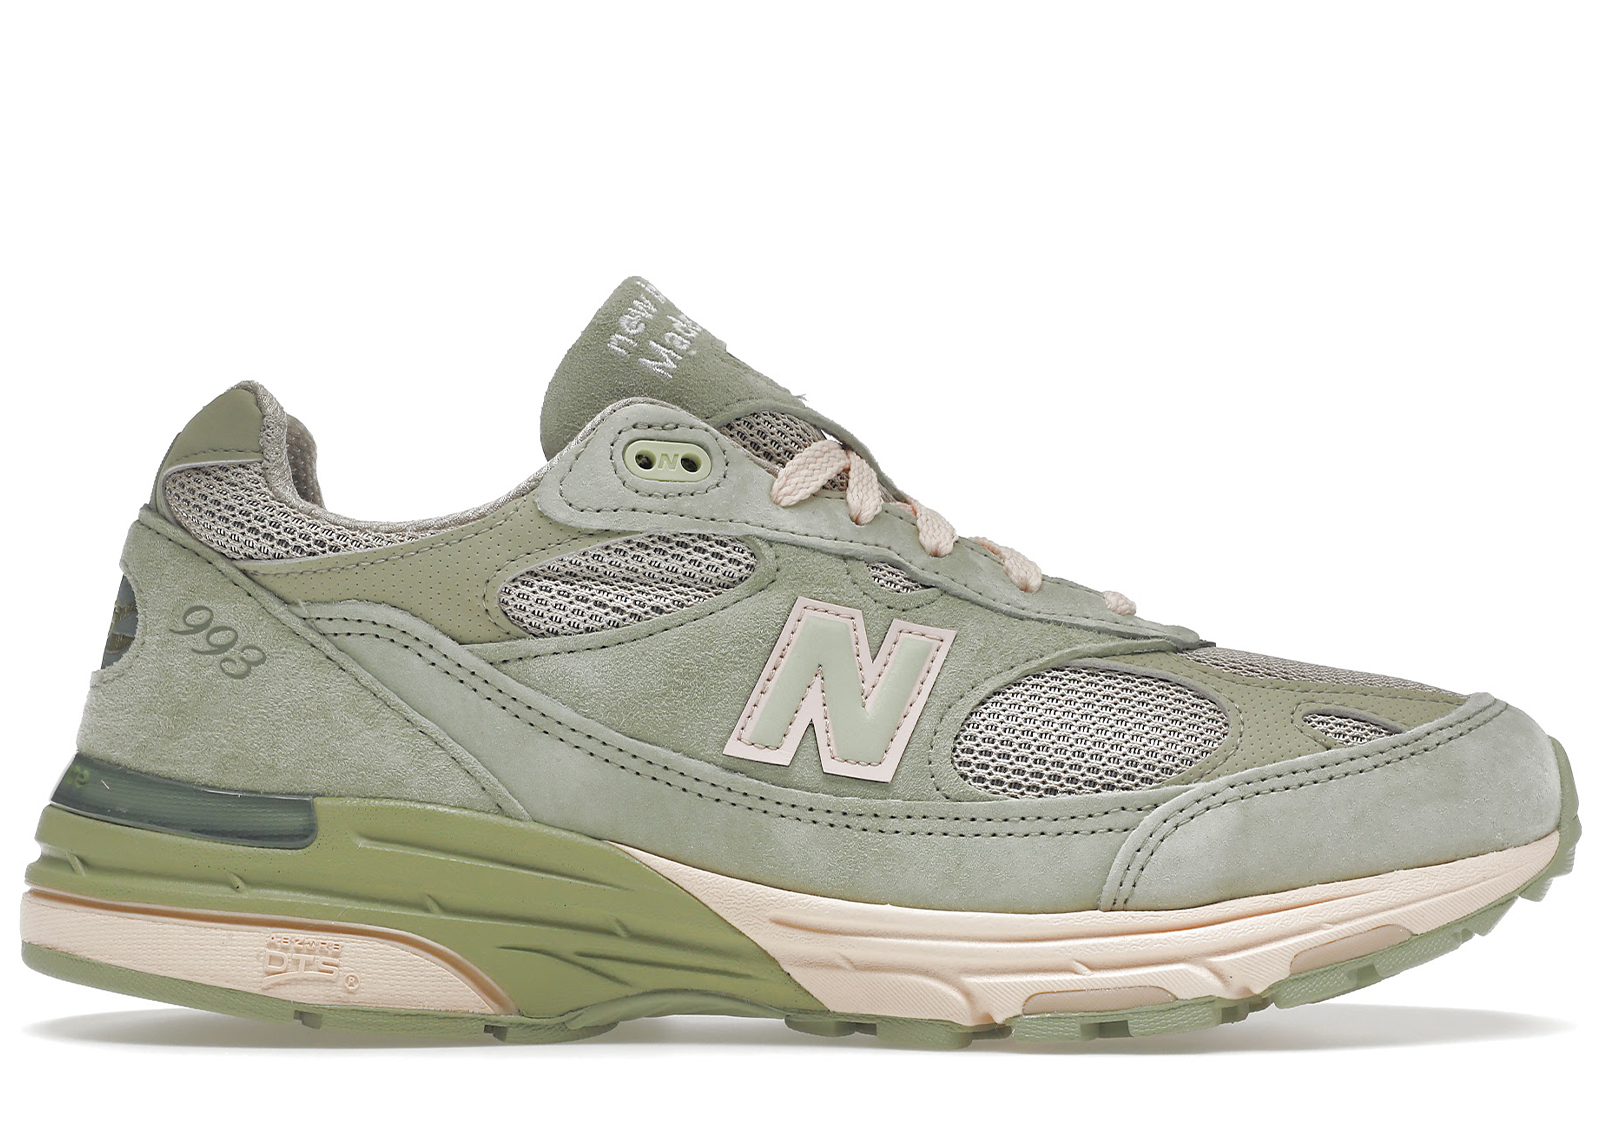 Buy New Balance 993 Shoes & New Sneakers - StockX